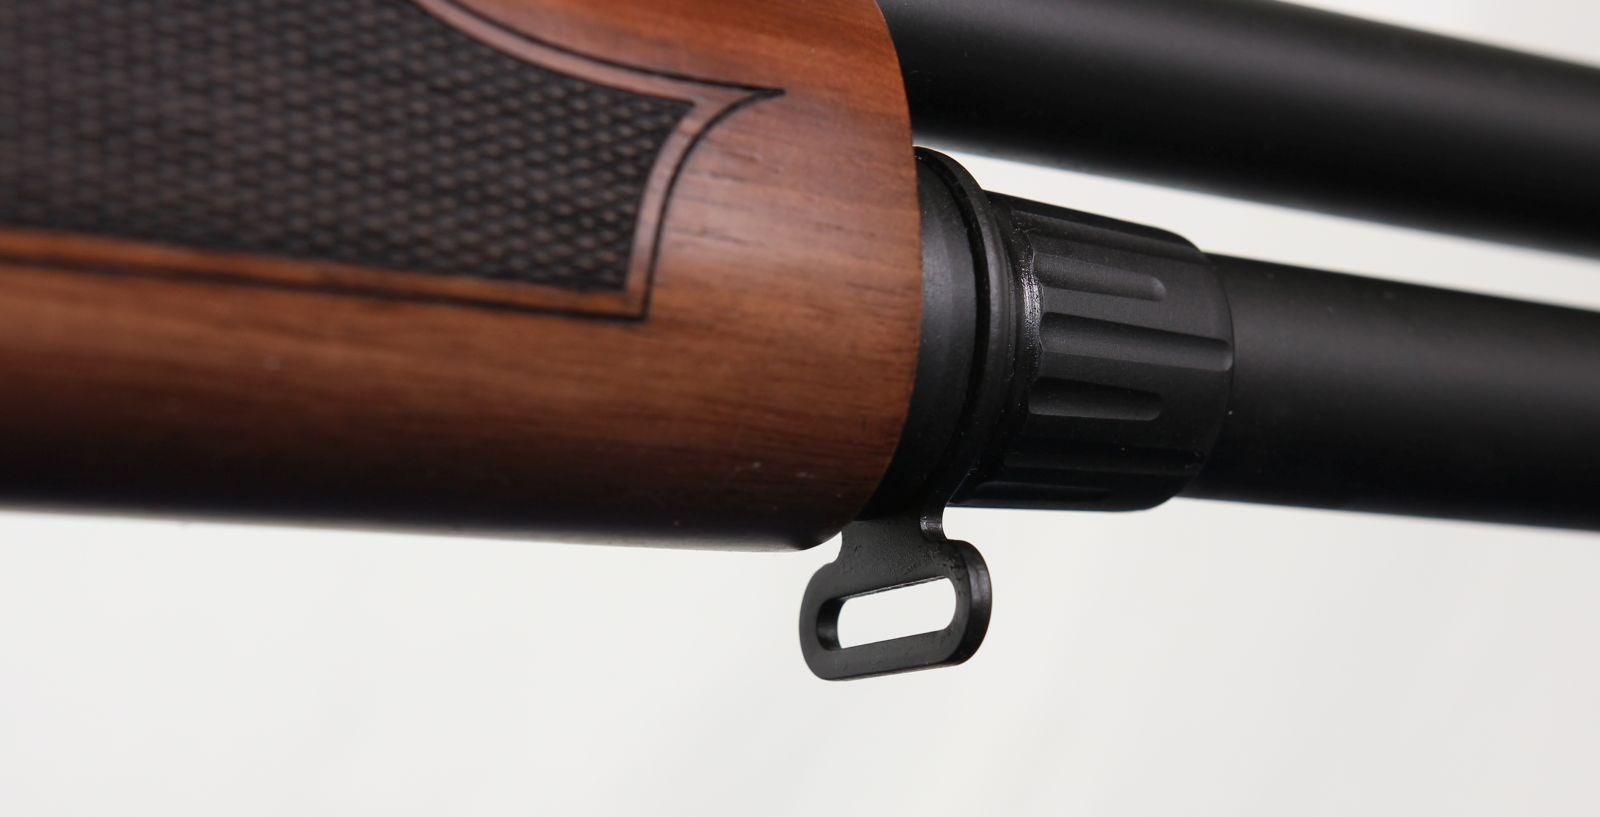 Are you the kind of person who’d buy a lever action shotgun? 